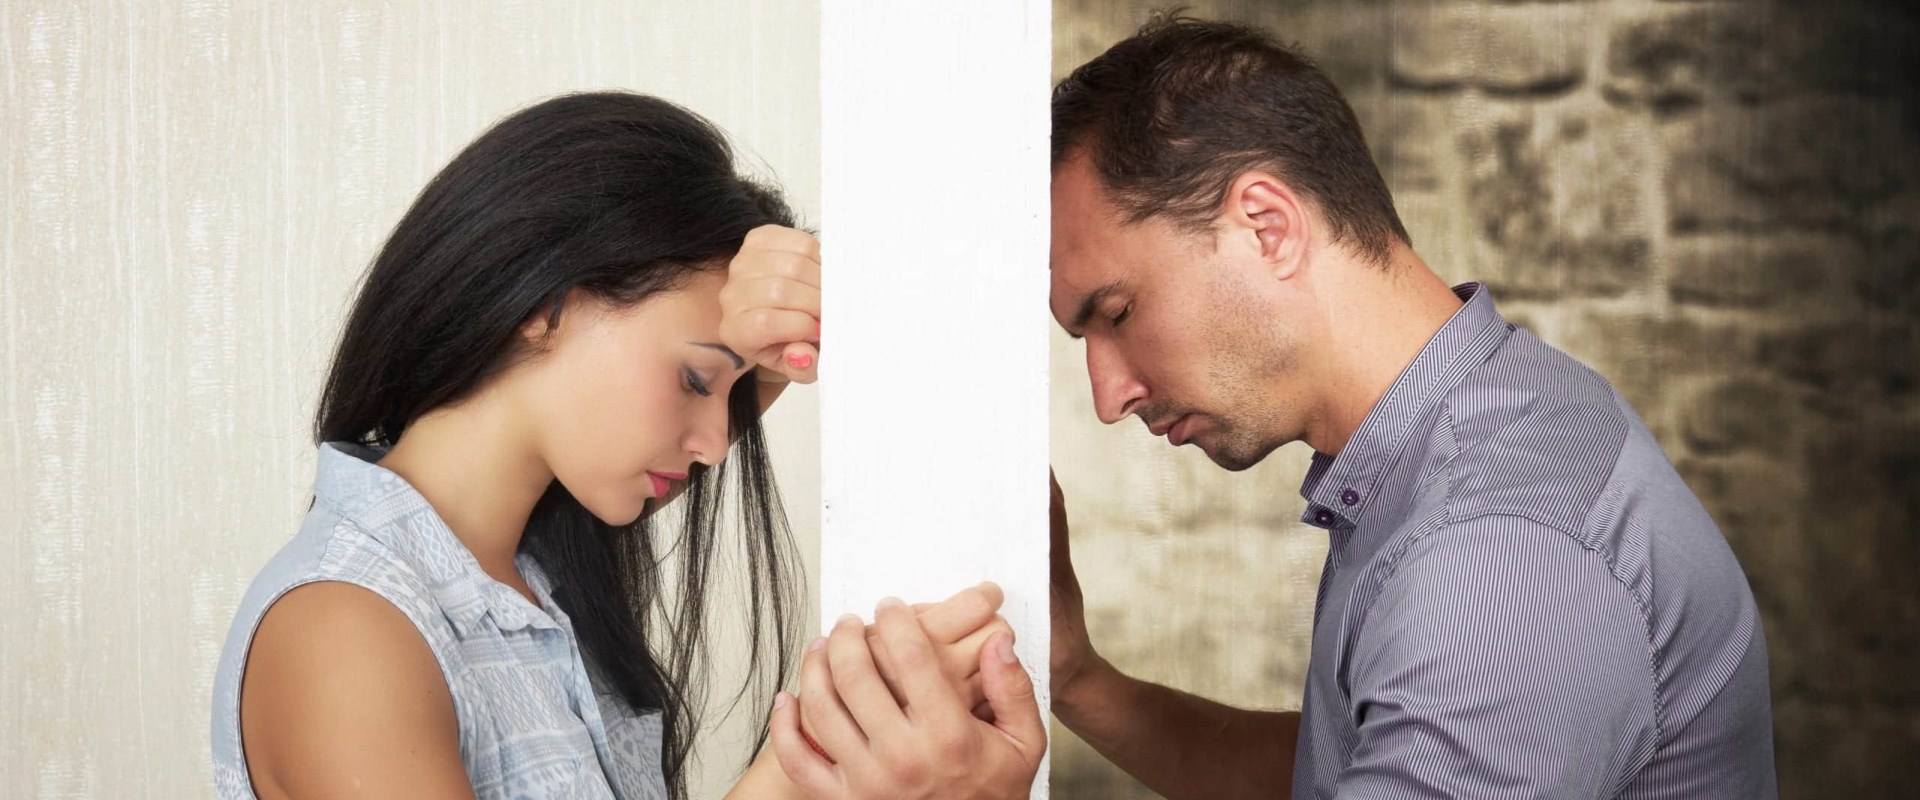 Resolving Conflicts in Relationships